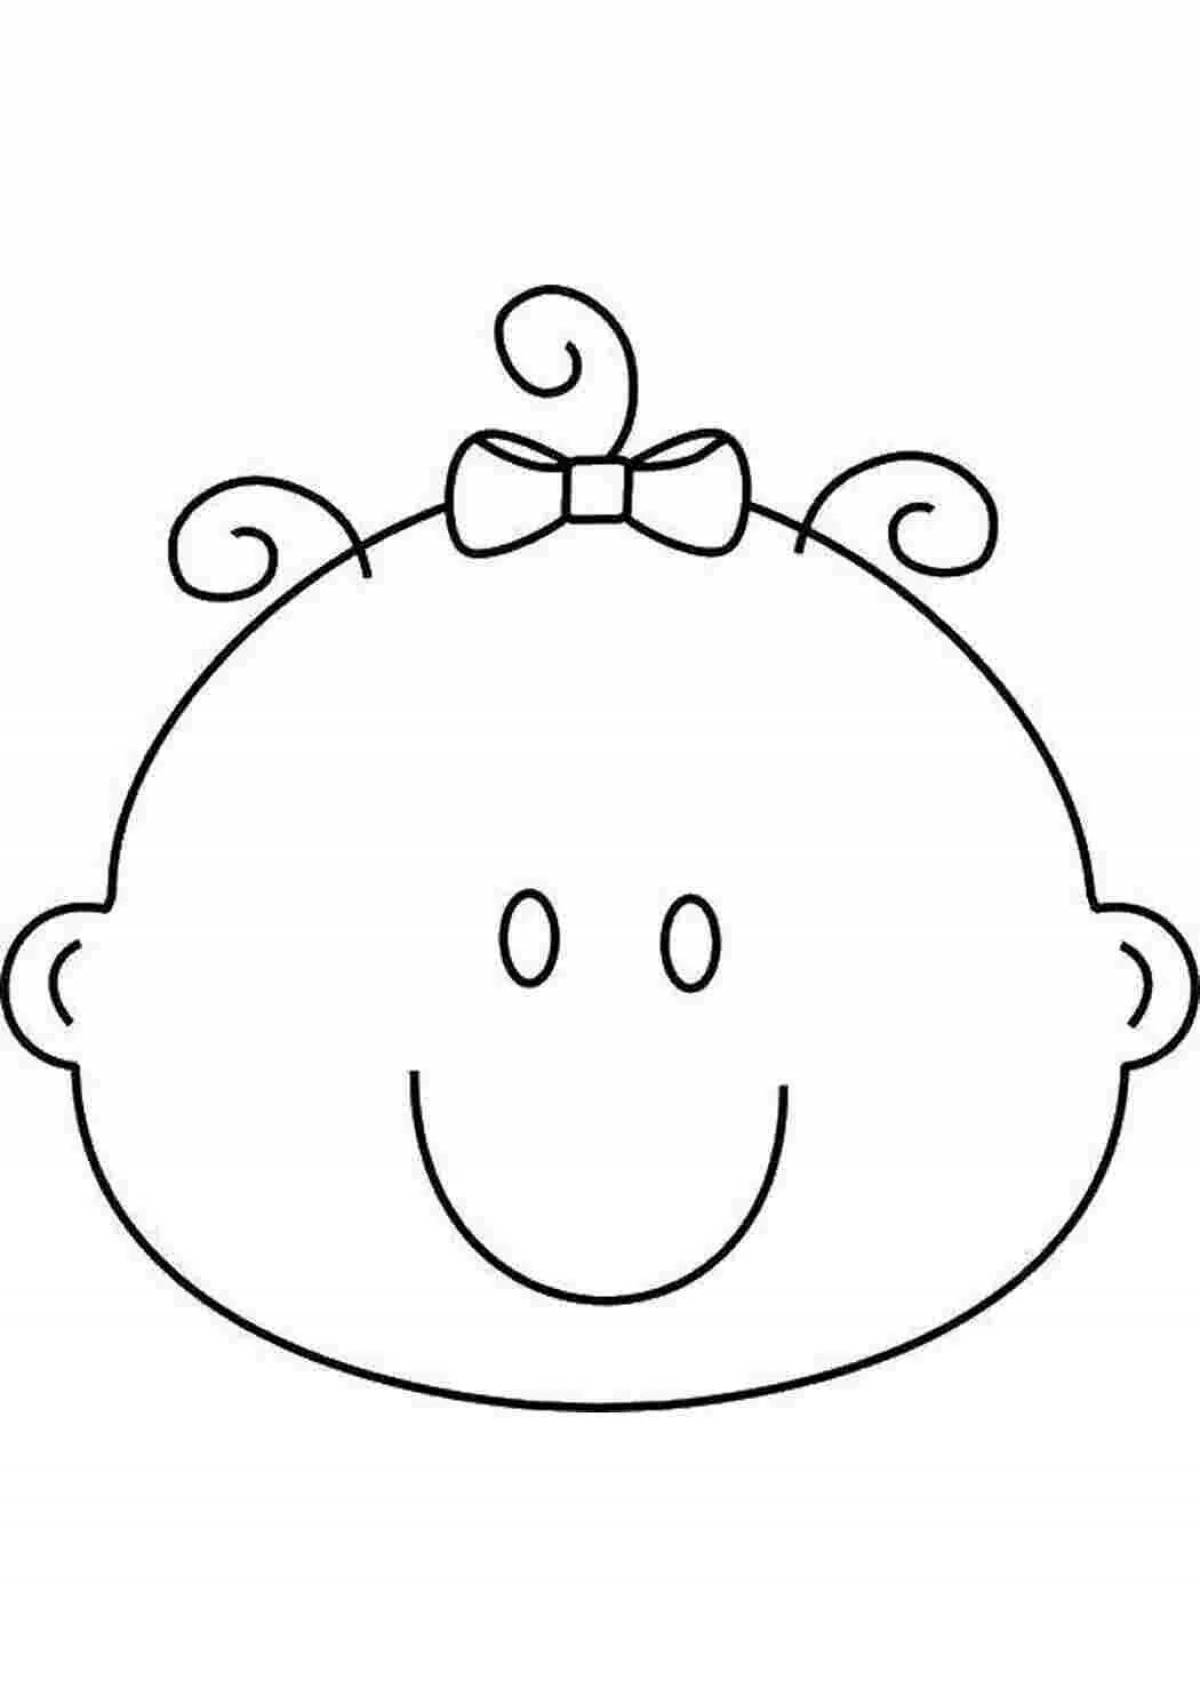 Joyful baby face coloring book for kids